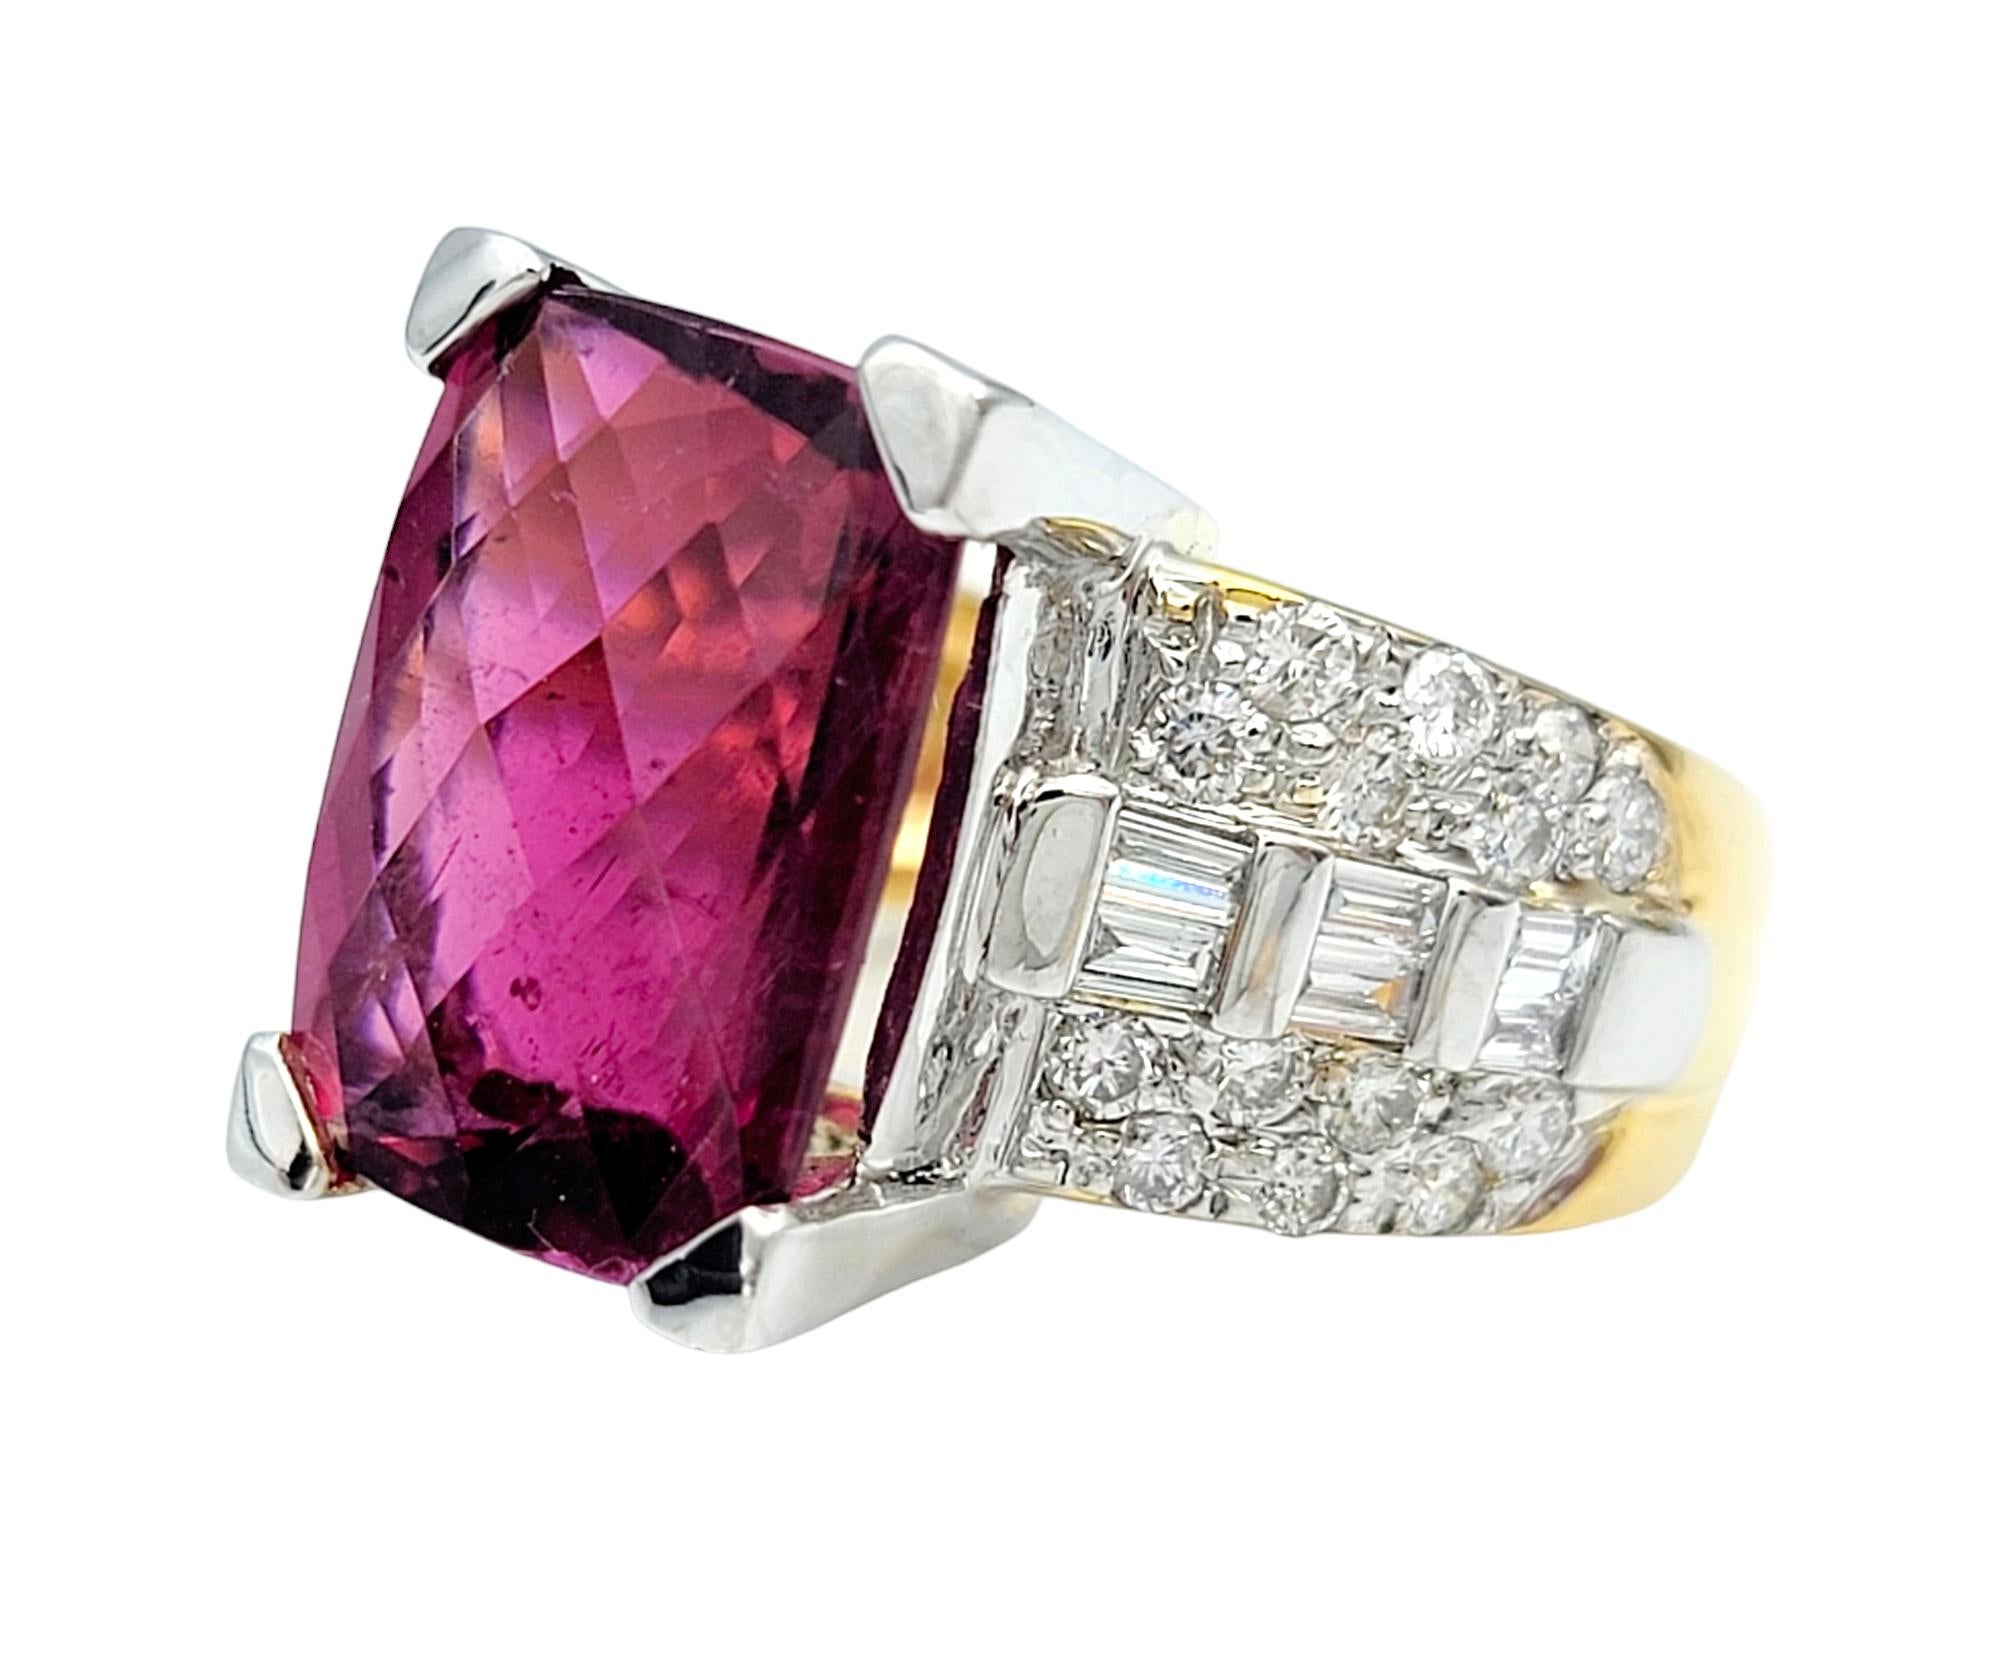 Ring Size: 5

This beautiful pink tourmaline and diamond ring is a breathtaking piece of jewelry, showcasing a harmonious blend of gemstones and precious metals. The checkerboard radiant cut pink tourmaline takes center stage, with its vibrant color